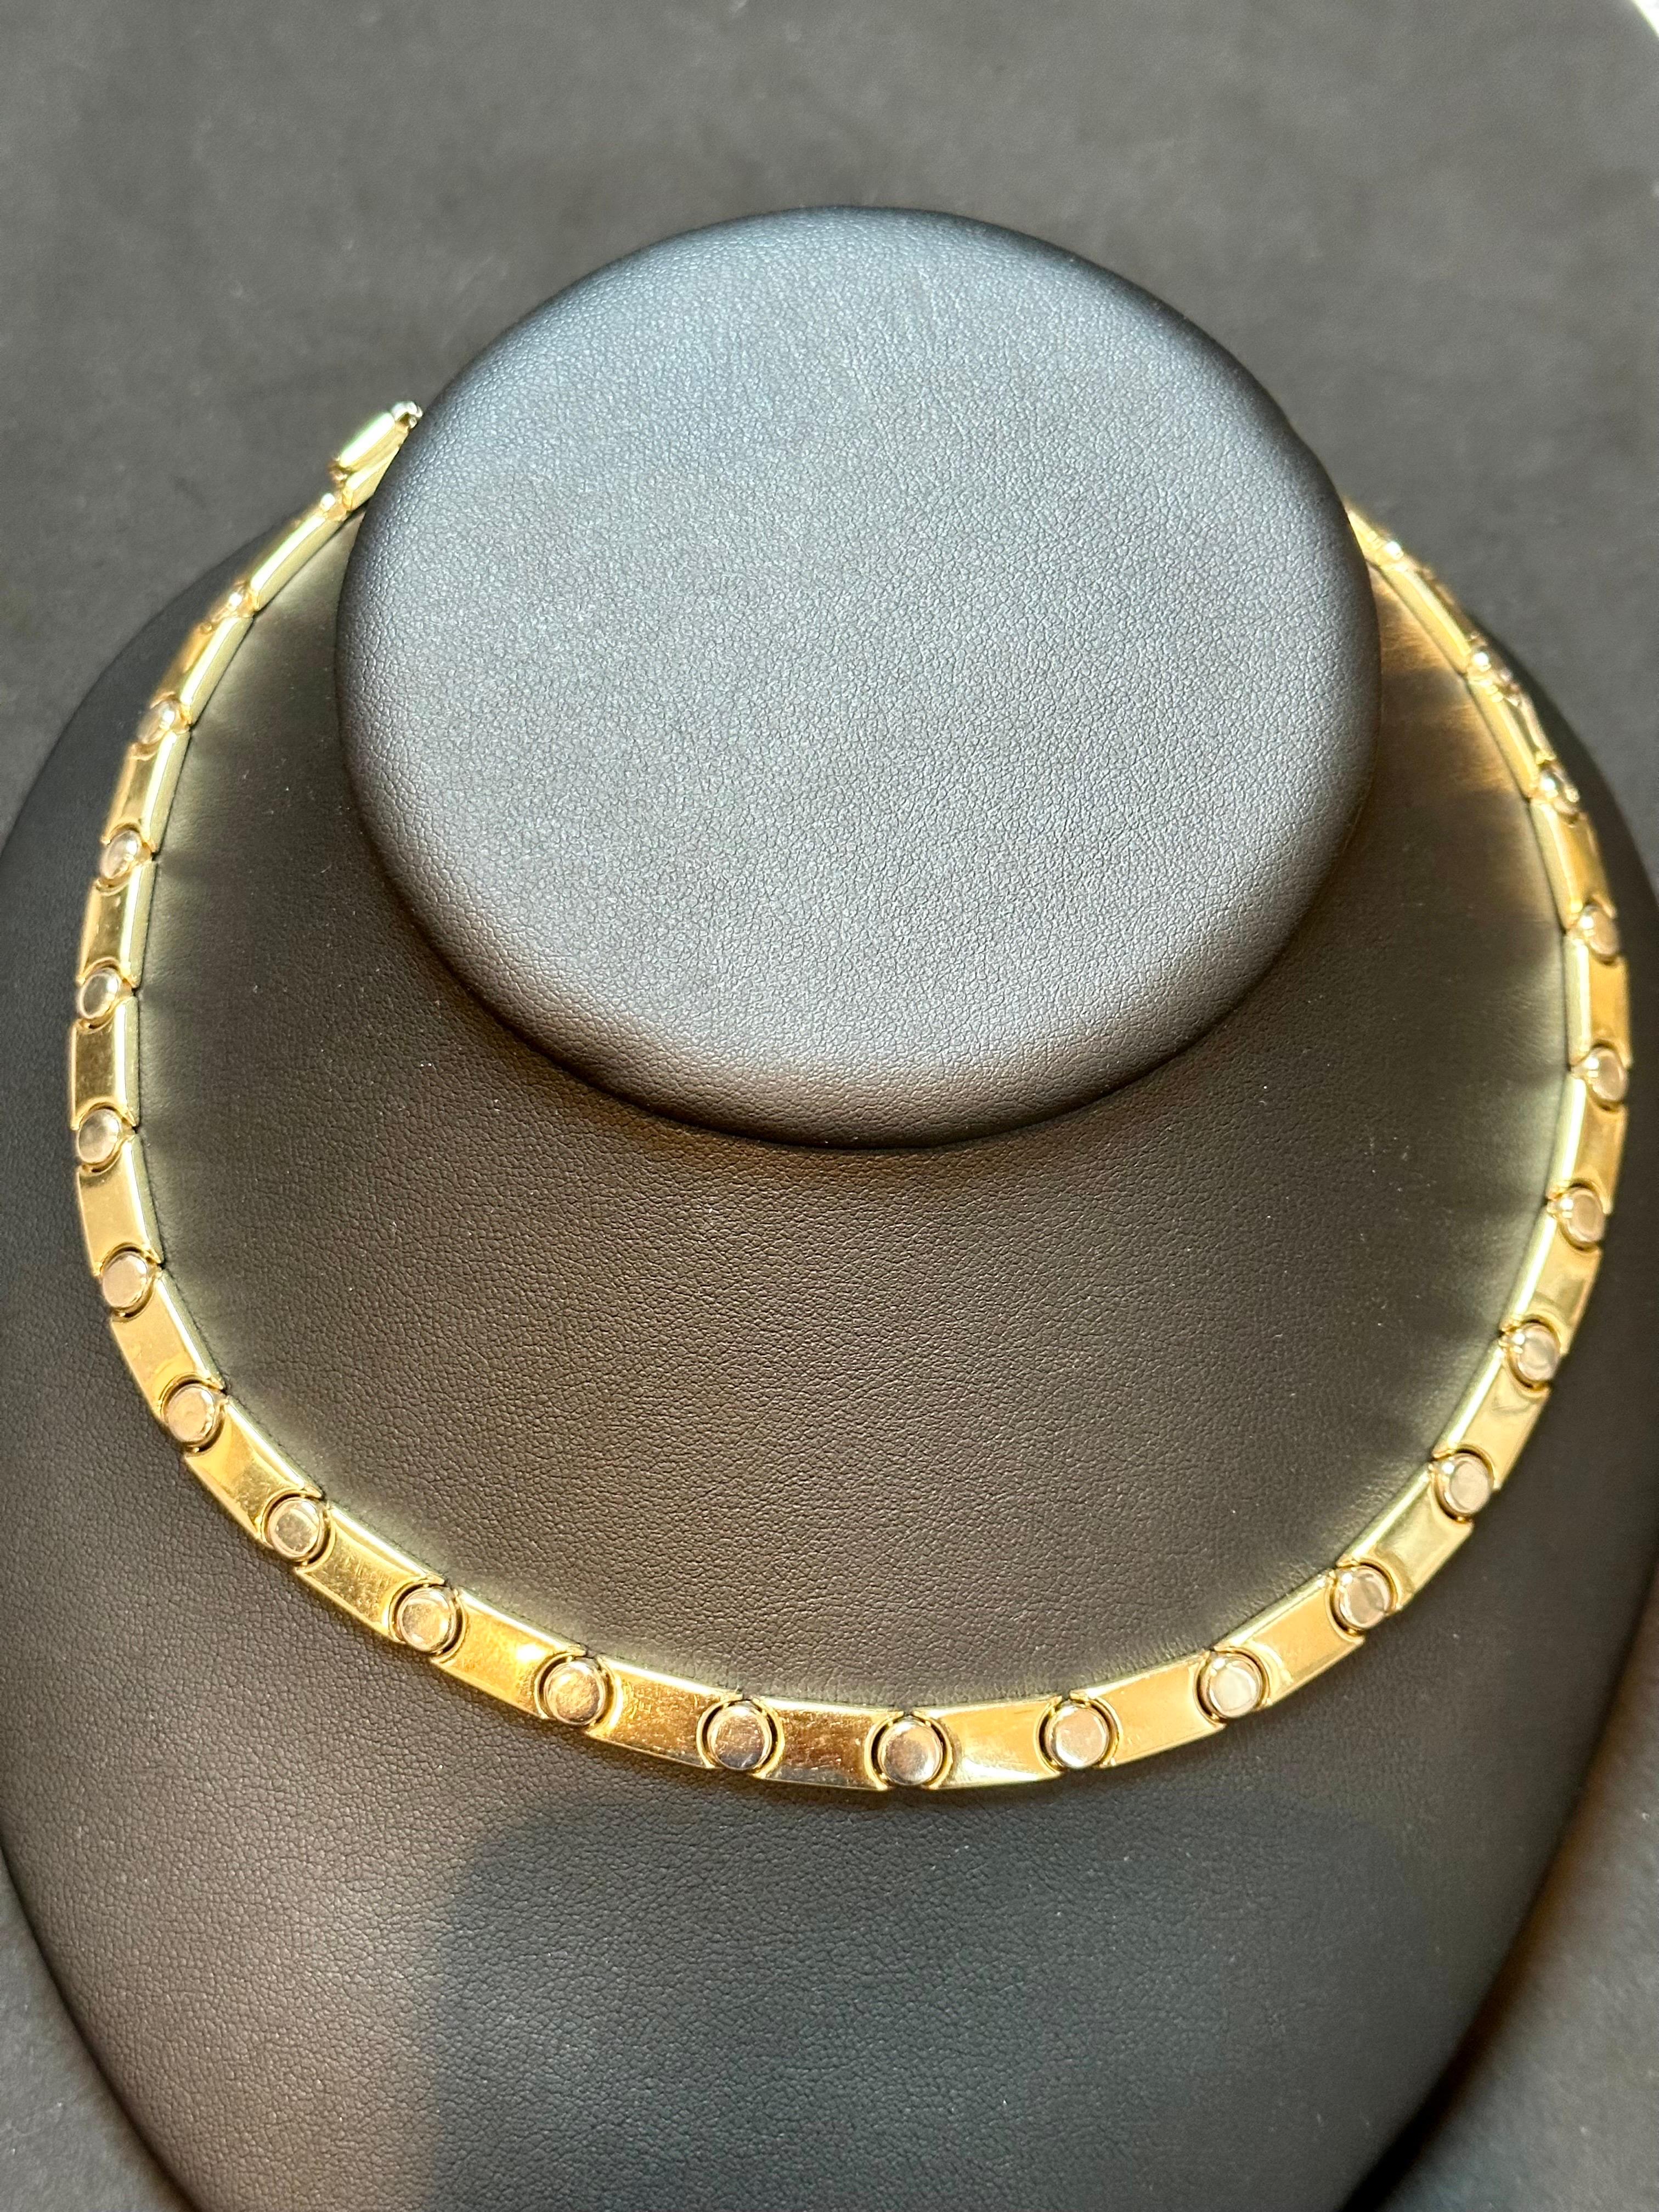 Discover the vintage charm of this 14 Kt Yellow Gold Cartier Look Reversible Screw Link Design Necklace. This necklace features a unique reversible screw link design that adds versatility and elegance to any outfit. Measuring 17 inches in length and